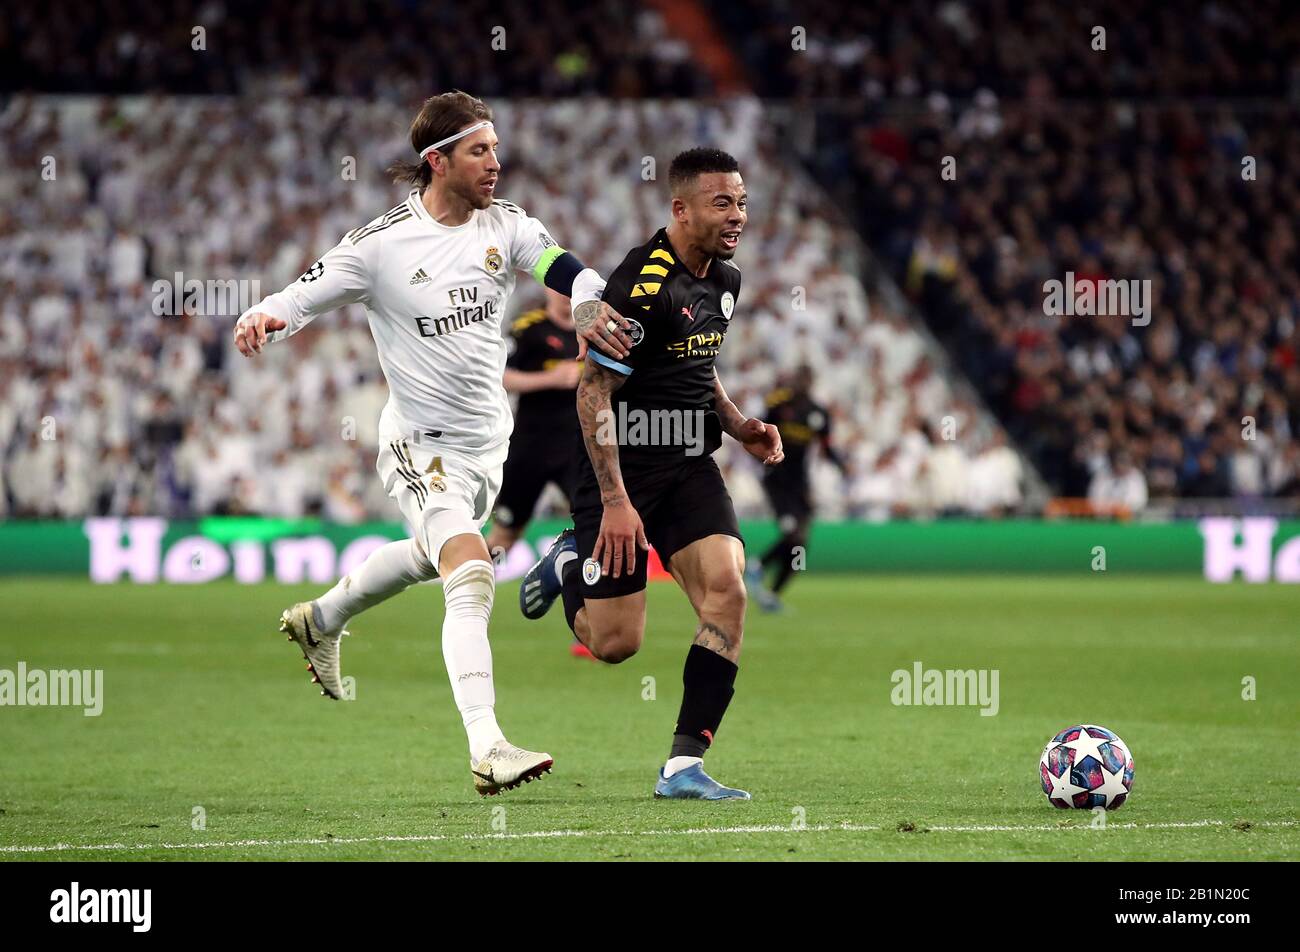 Real Madrid's Sergio Ramos brings down Manchester City's Gabriel Jesus and  is sent off for a professional foul during the UEFA Champions League round  of 16 first leg match at the Santiago